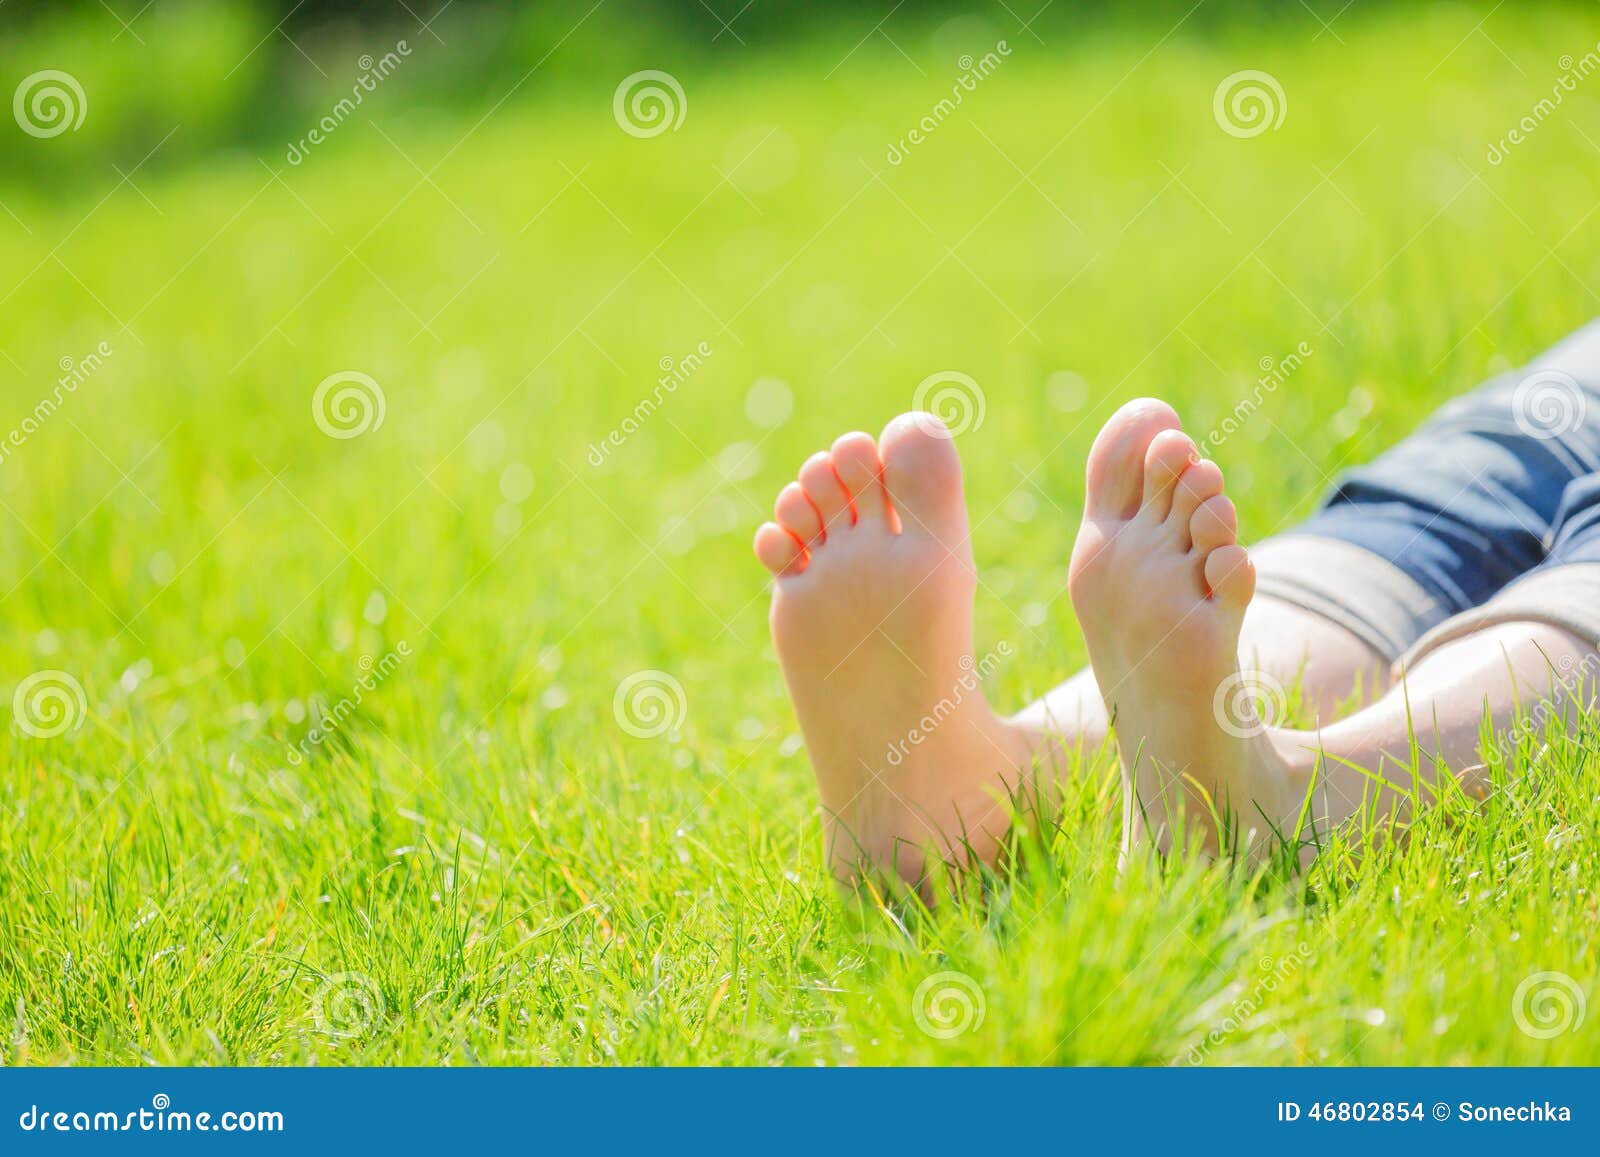 bare feet on green grass with autumn leaves